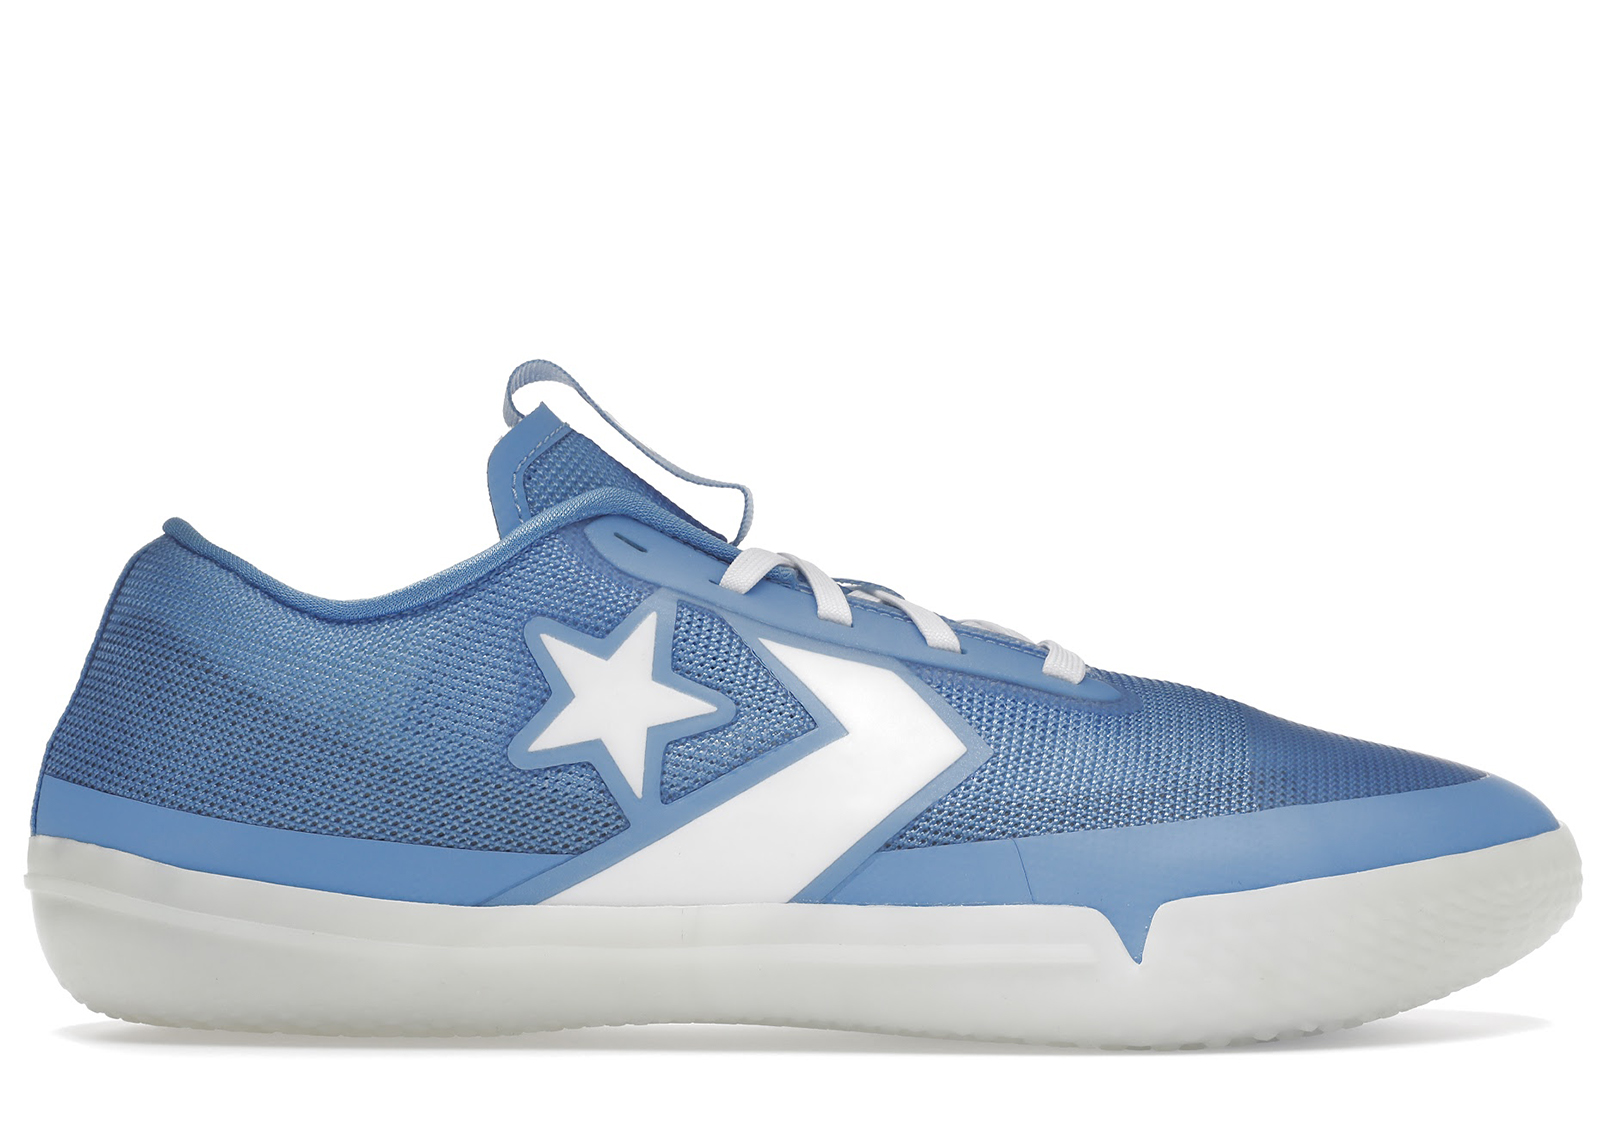 Converse All Star Pro BB Low Solstice